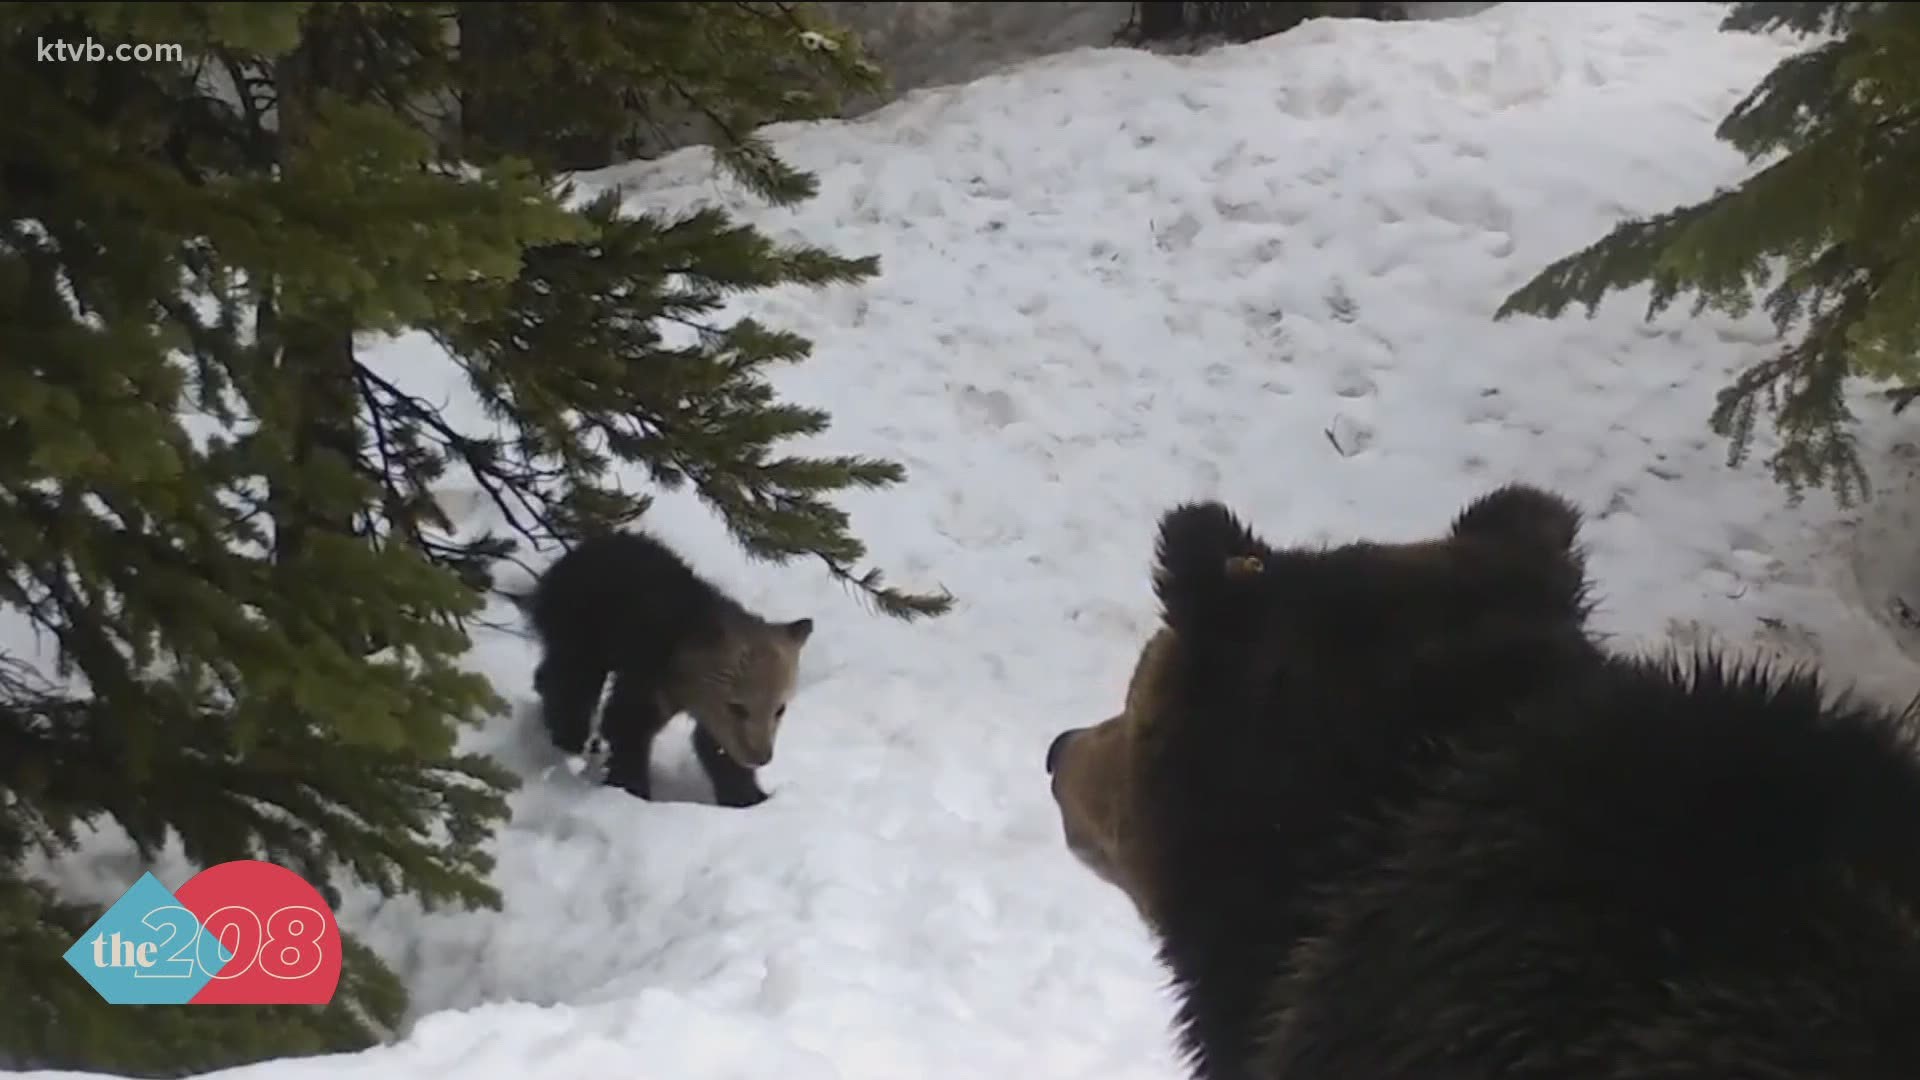 "The antics of these three cubs playing together was too cute not to share," the Idaho Department of Fish and Game said.